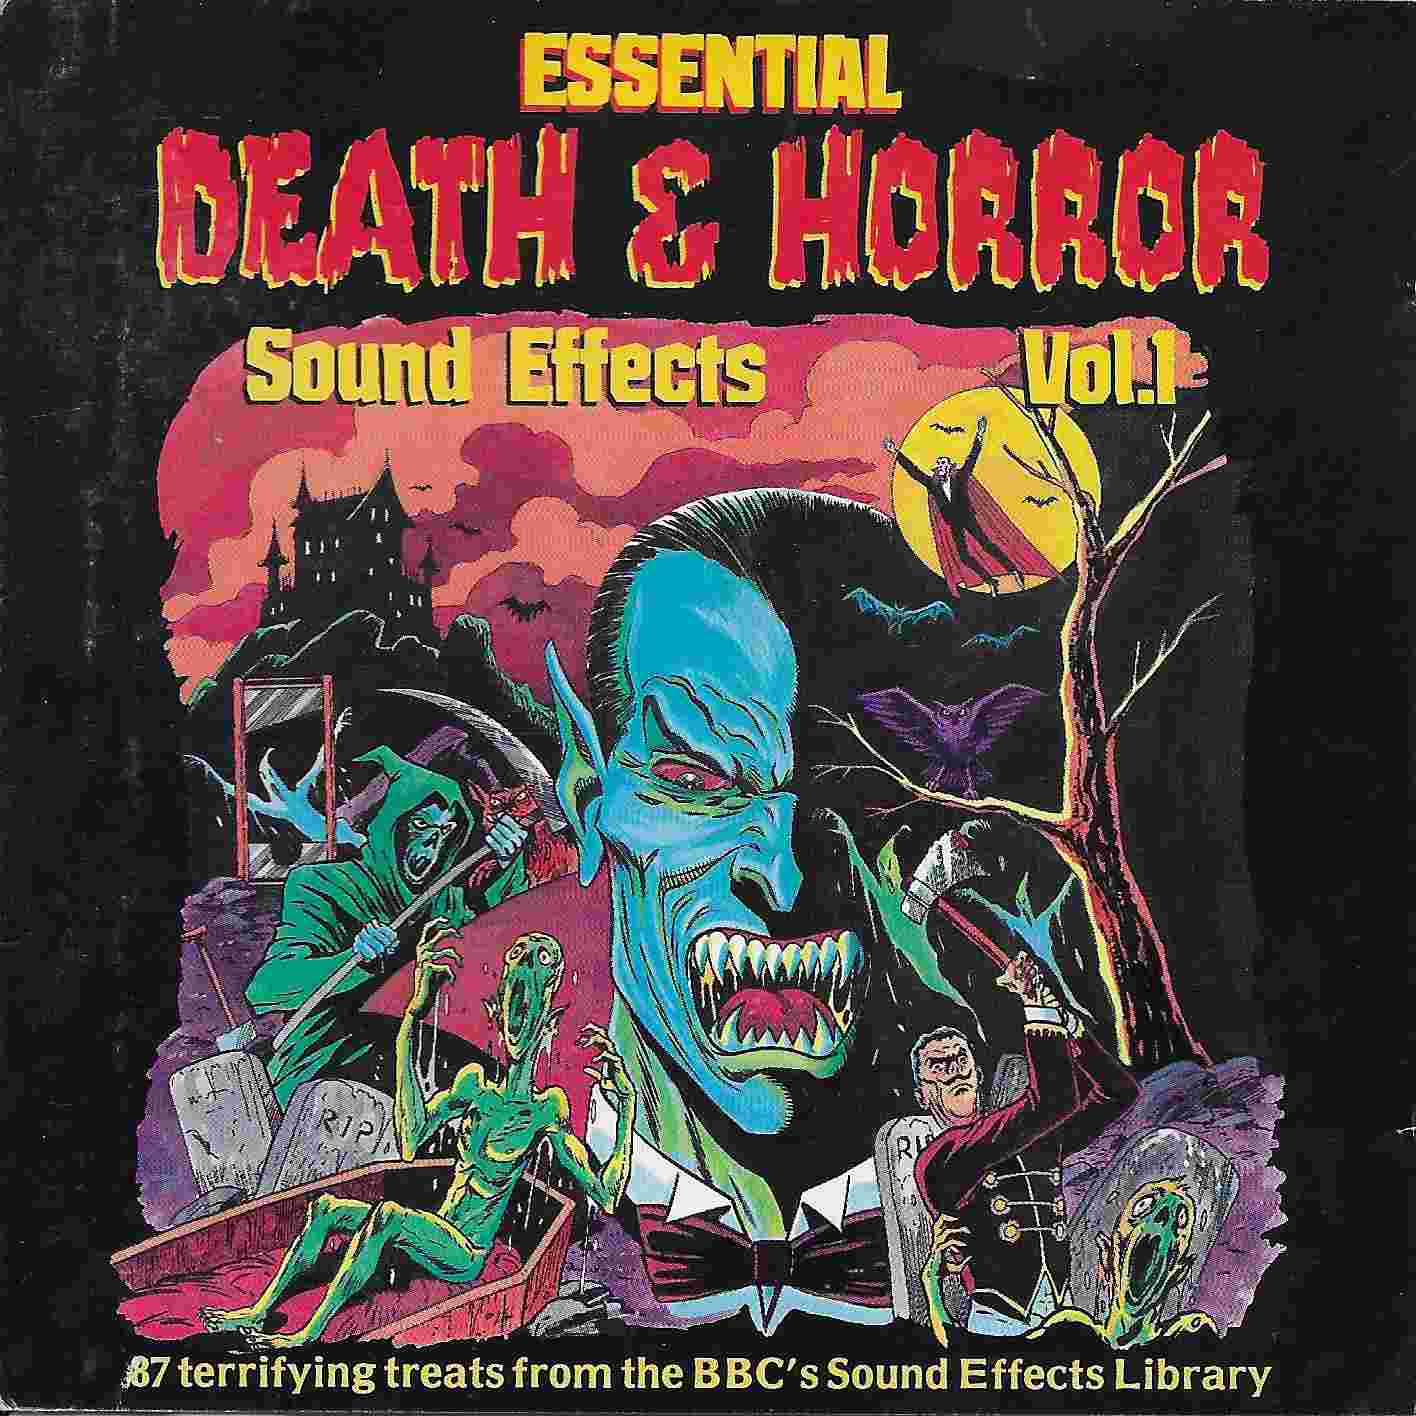 Picture of BBCCD822 Essential death and horror - Volume 1 by artist Various from the BBC cds - Records and Tapes library